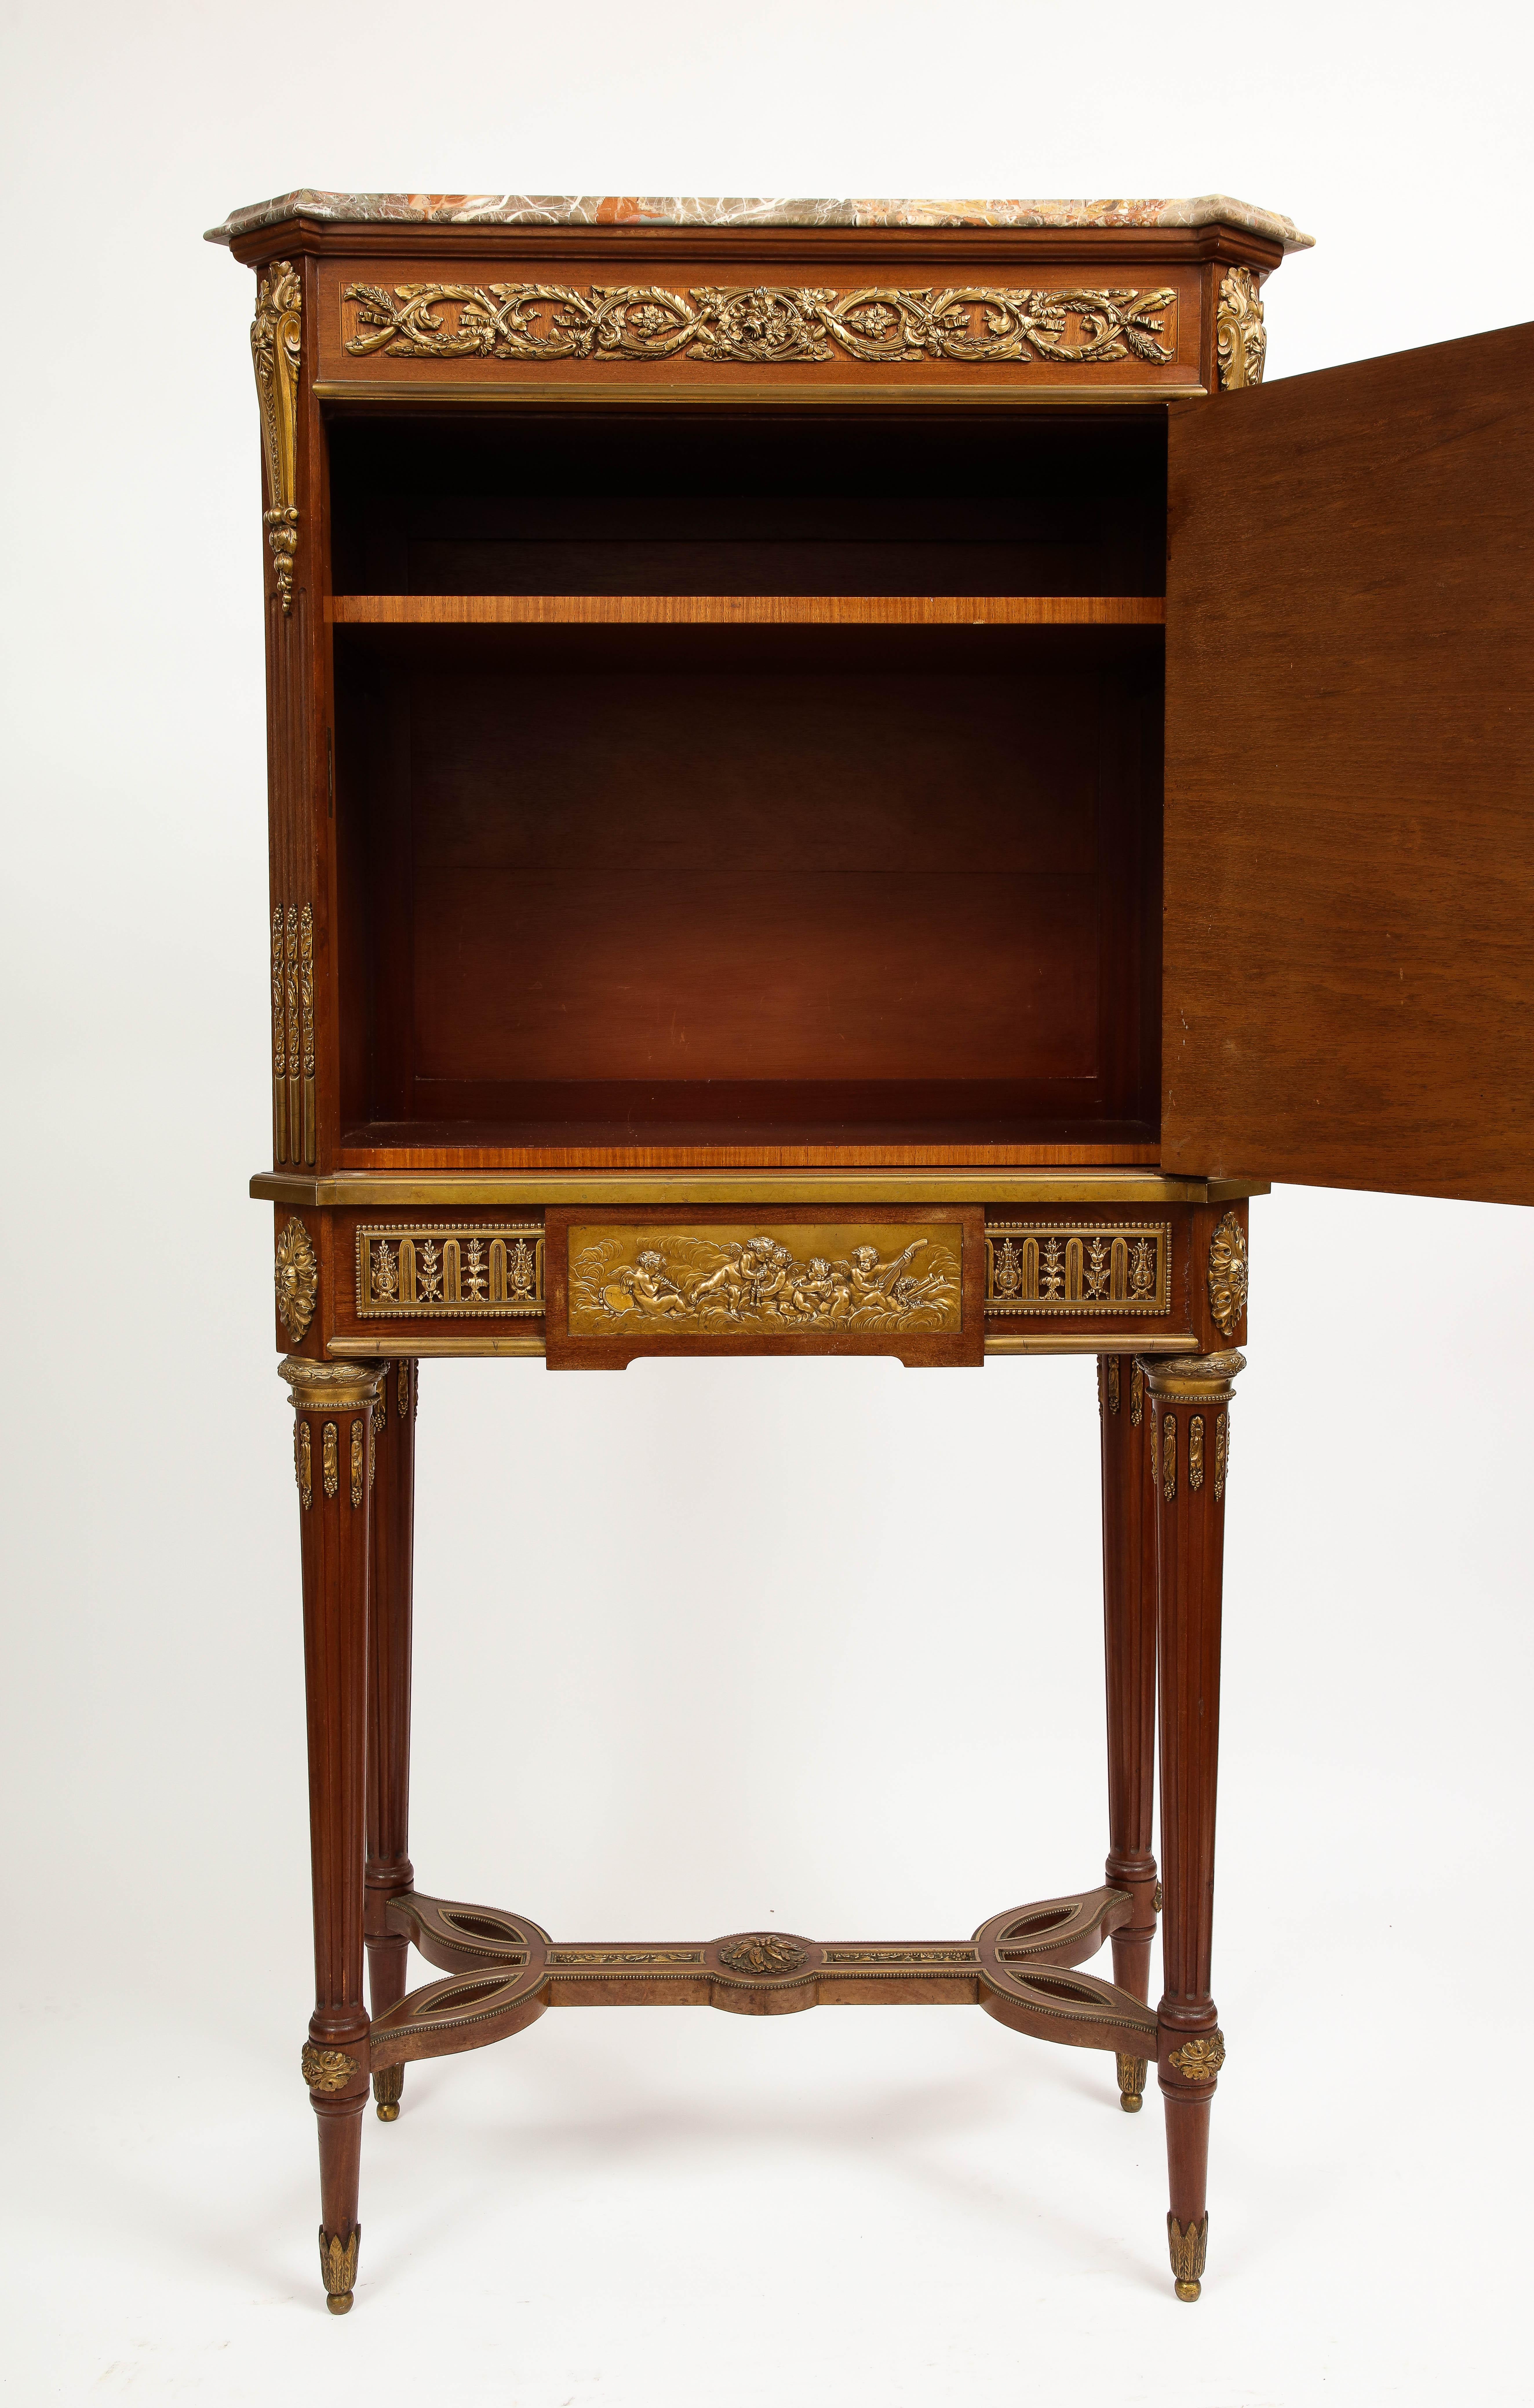 Hand-Painted 19th Century Dore Bronze and Sèvres Porcelain Mounted Parquetry Cabinet For Sale